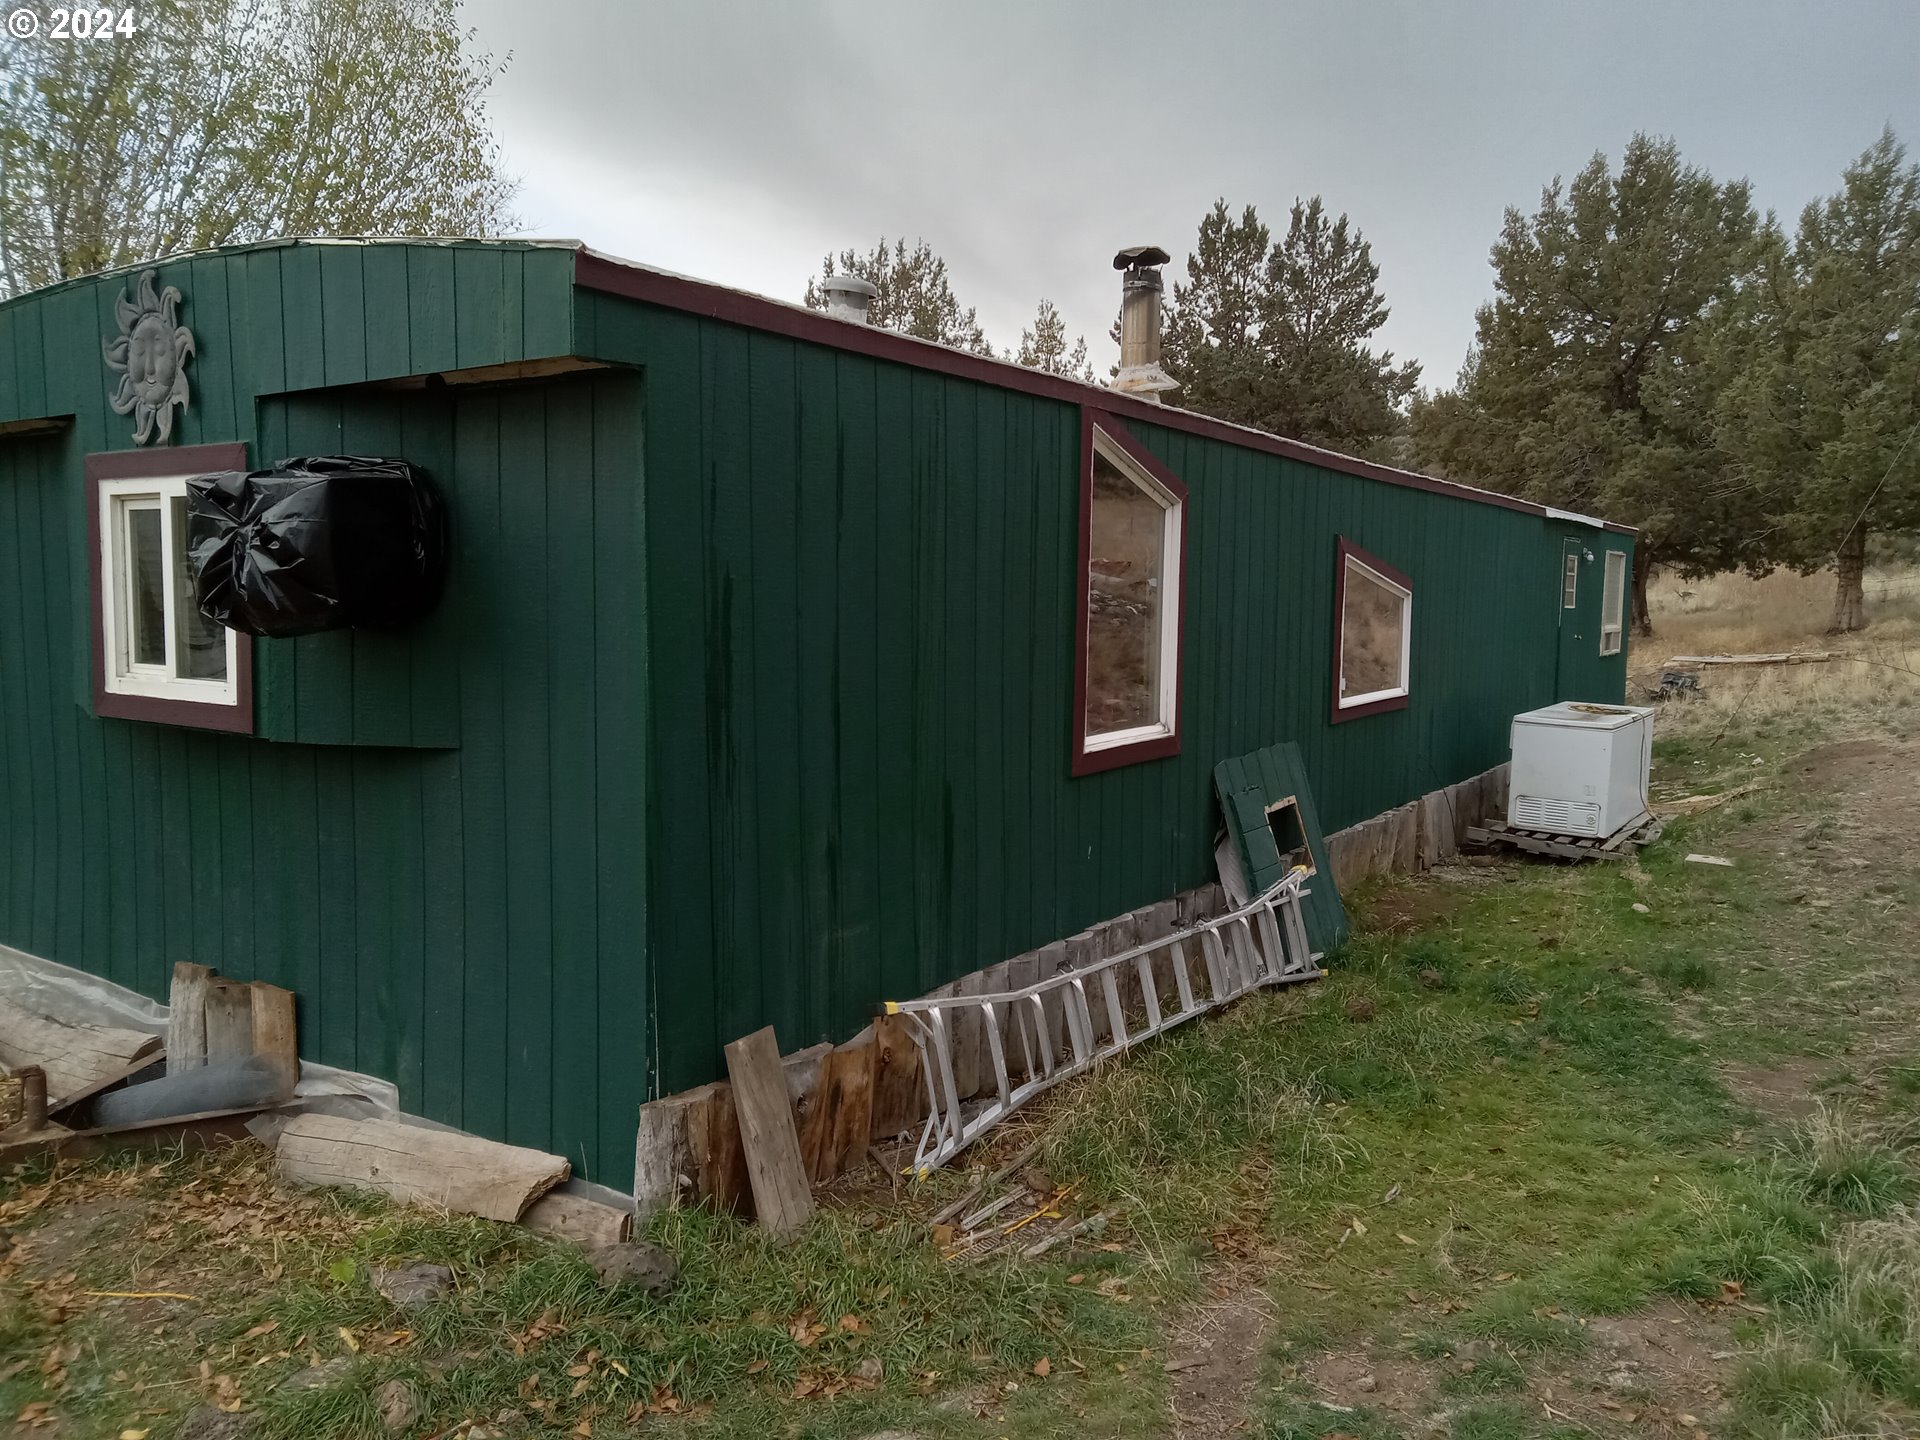 32843 HARNEY, Chiloquin, OR 